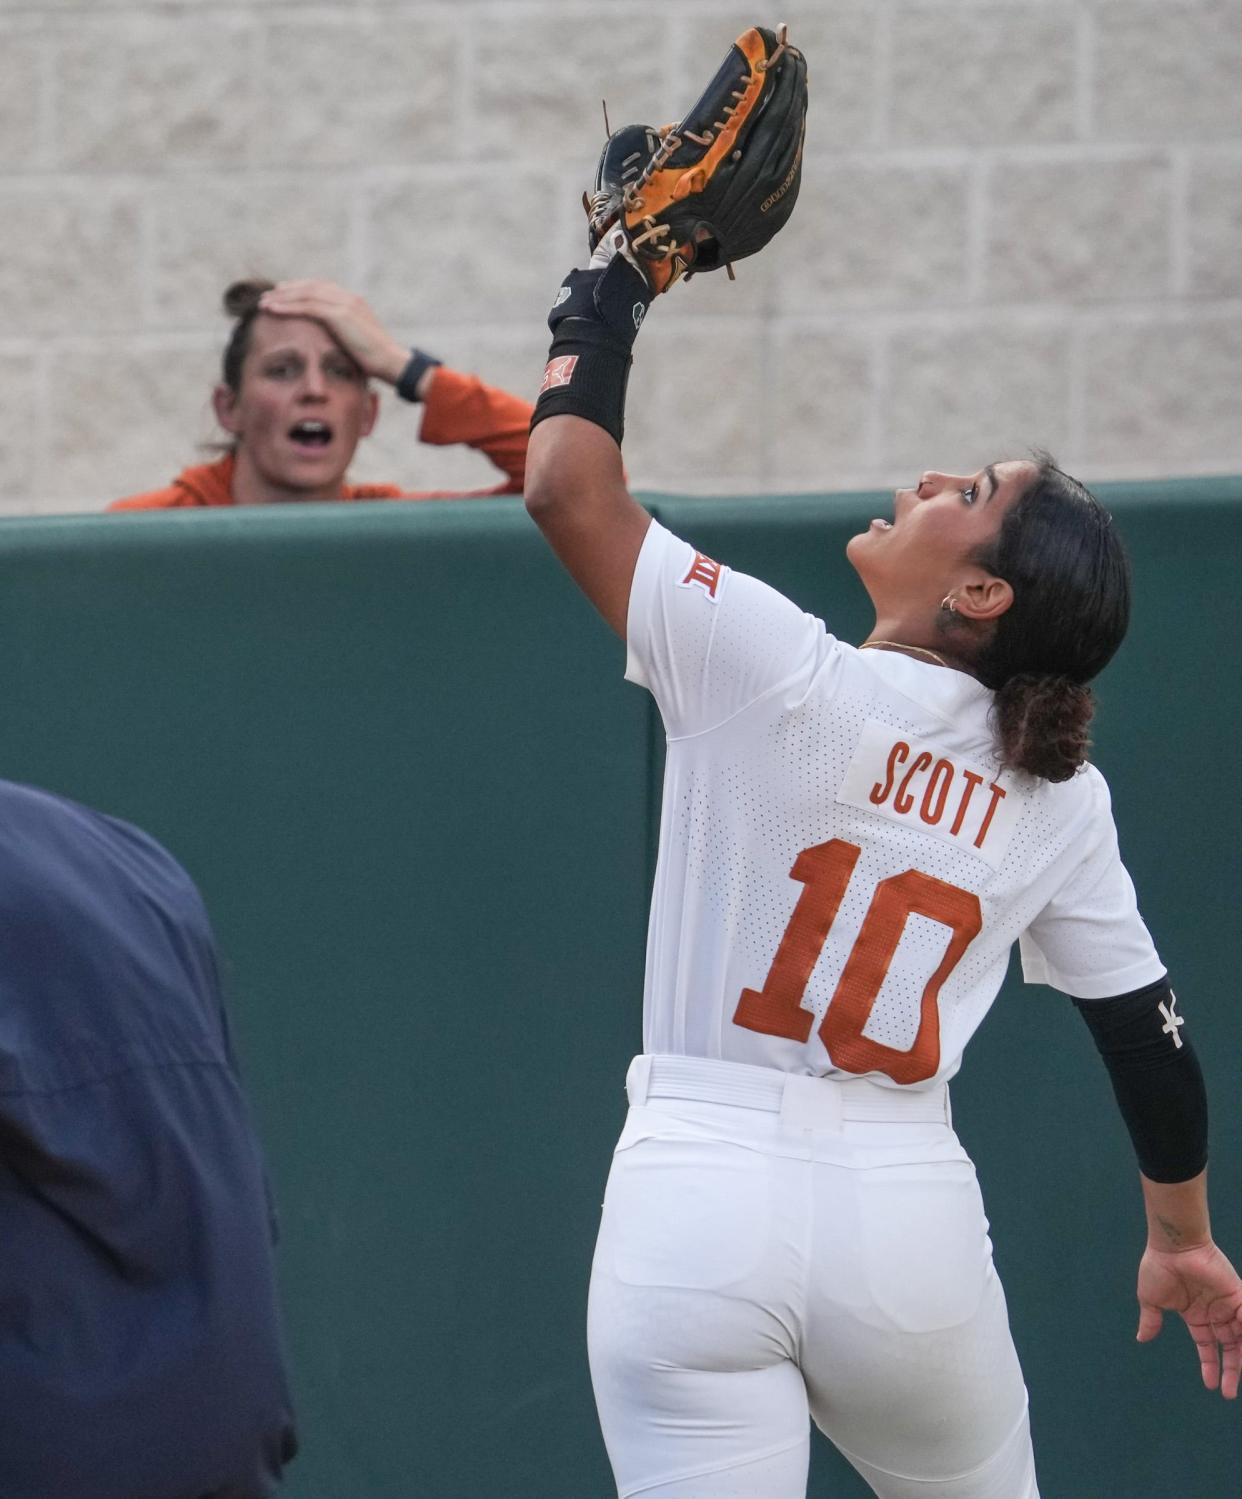 Texas third baseman Mia Scott chases down a foul ball in the Longhorns' 6-4 win over Texas State Wednesday at McCombs Field. Texas followed its series win over Oklahoma by beating the Bobcats, and the team will face Baylor this weekend.